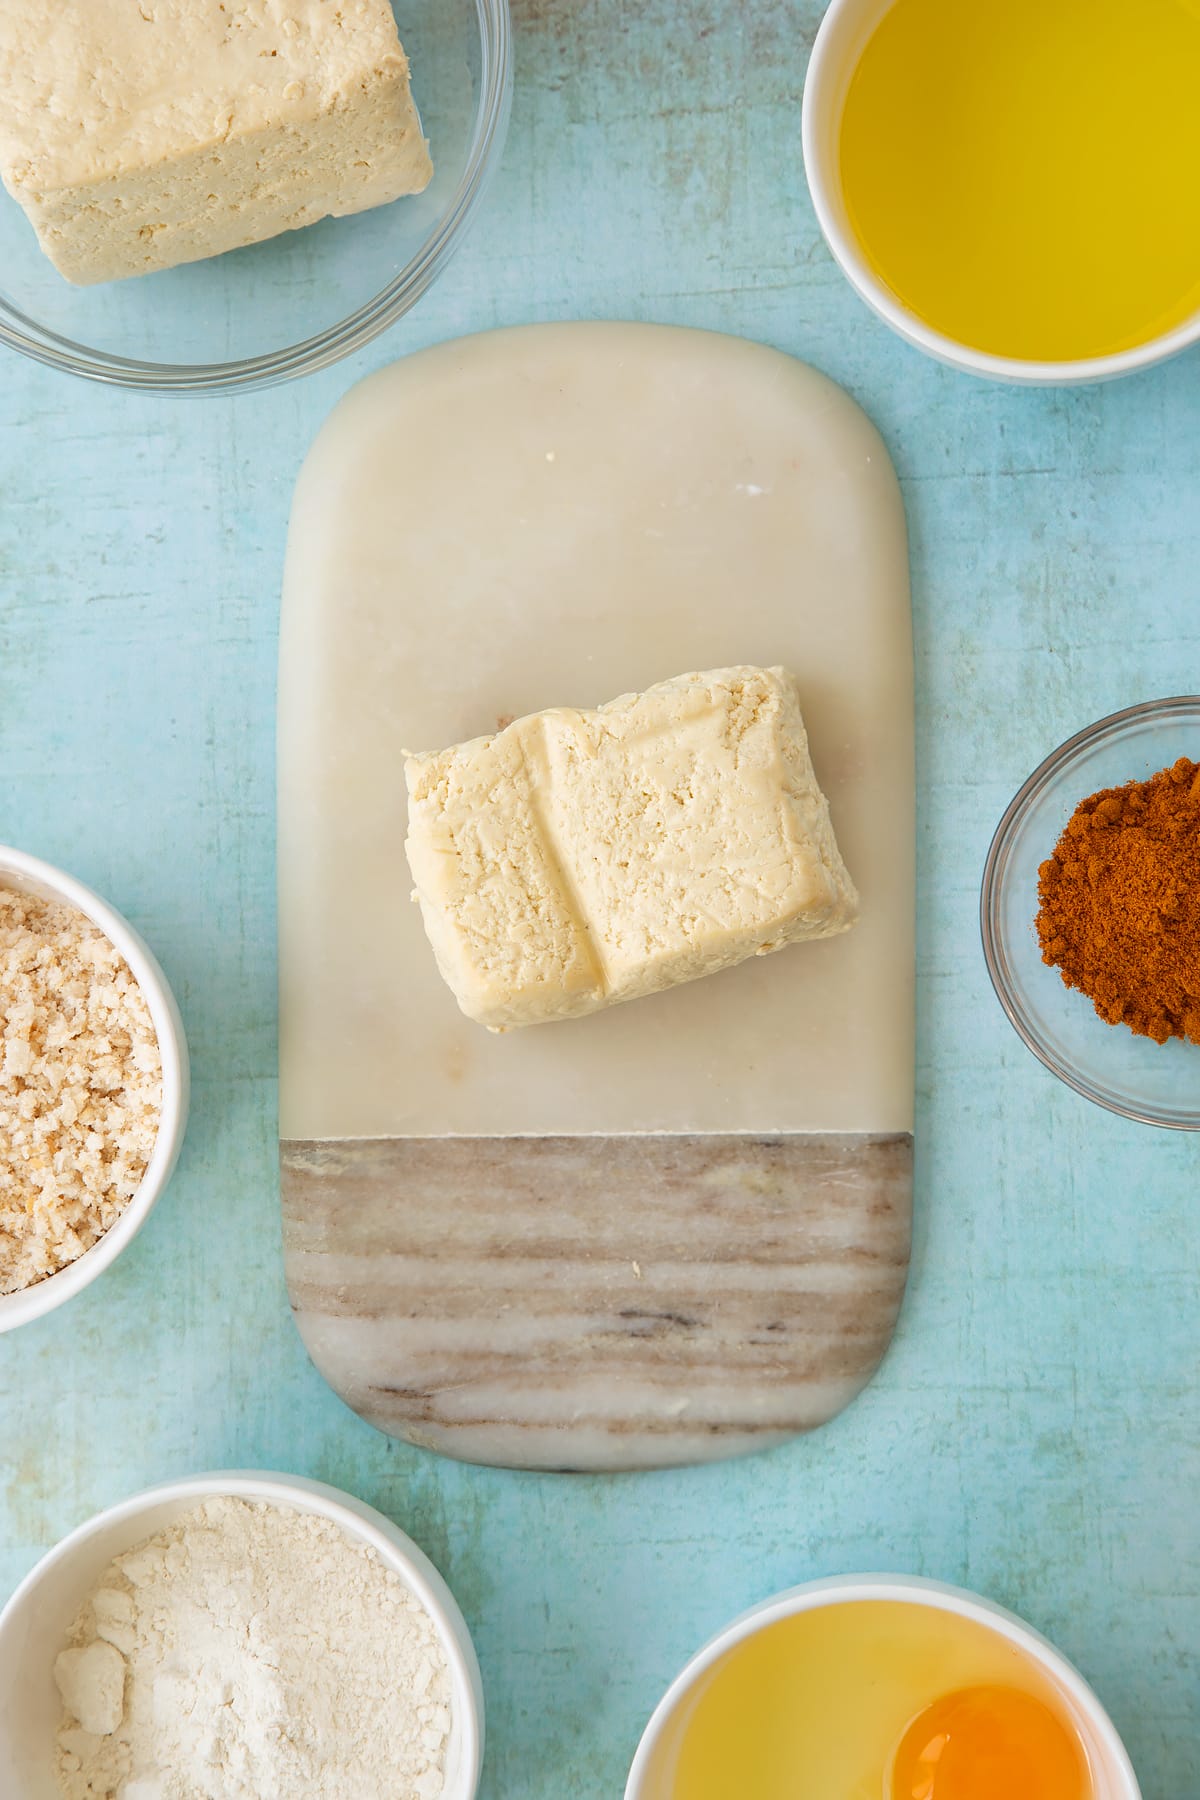 A block of firm tofu on a small marble board. Ingredients to make tofu fingers surround the board.